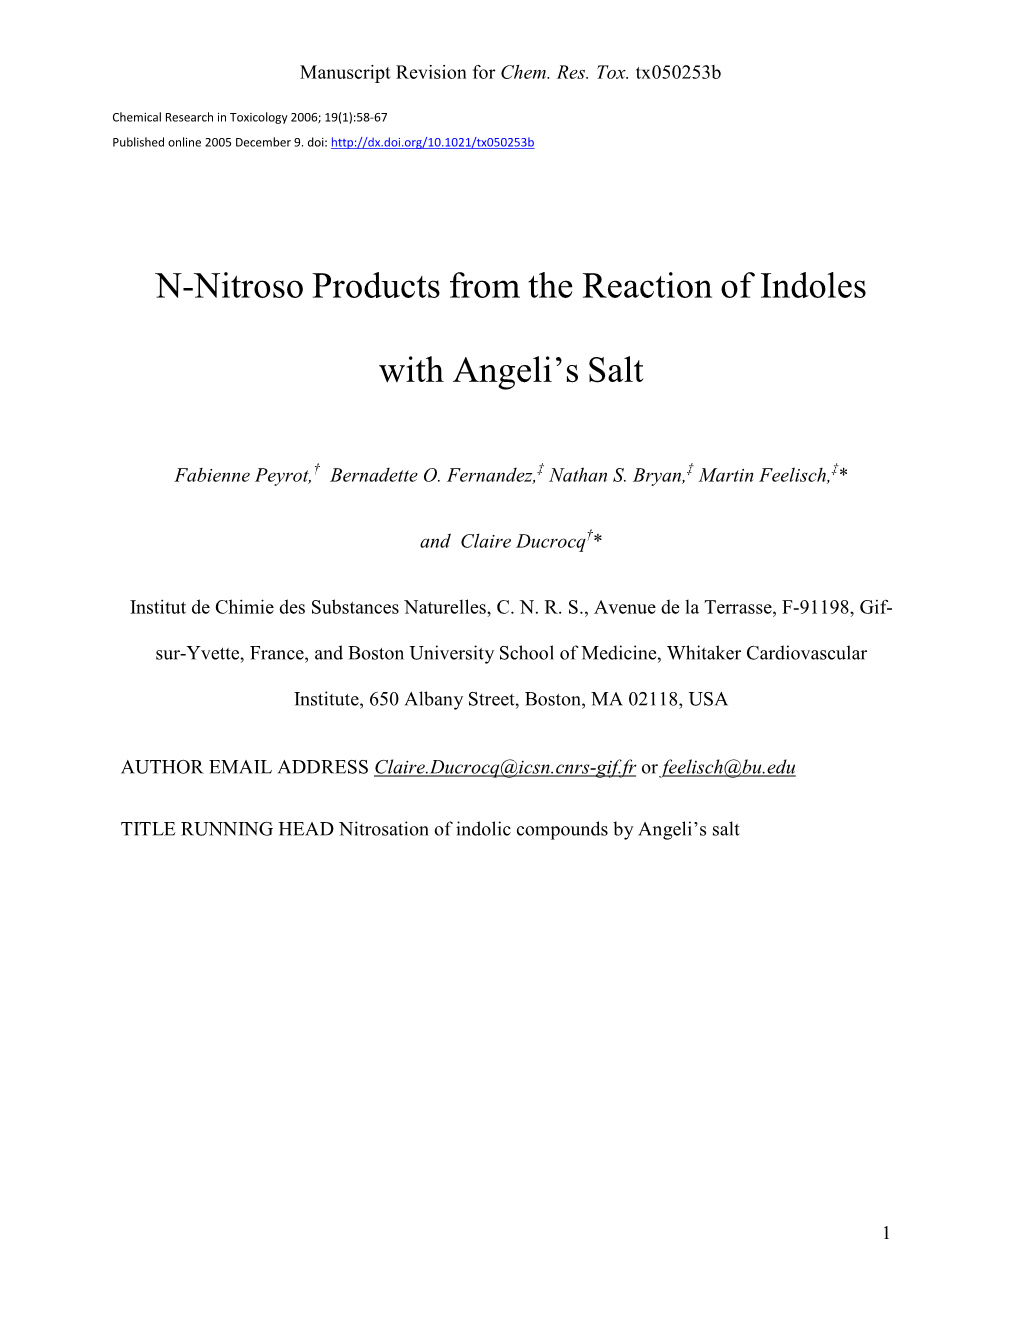 N-Nitroso Products from the Reaction of Indoles with Angeli's Salt